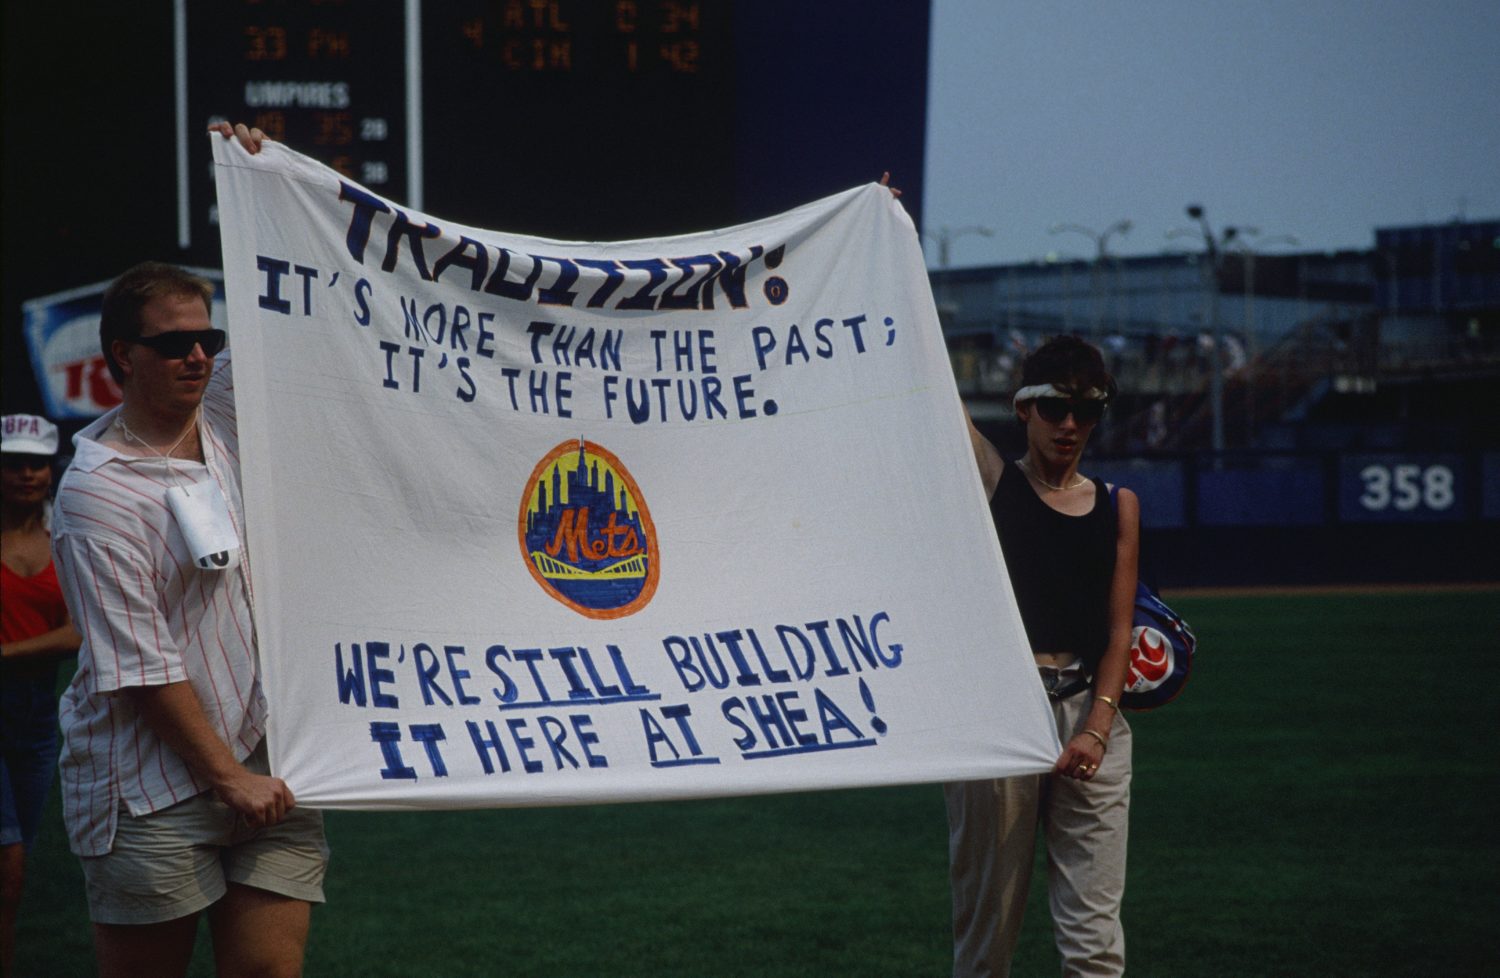 Emerson Banner Day: Banner on Building Tradition at Shea